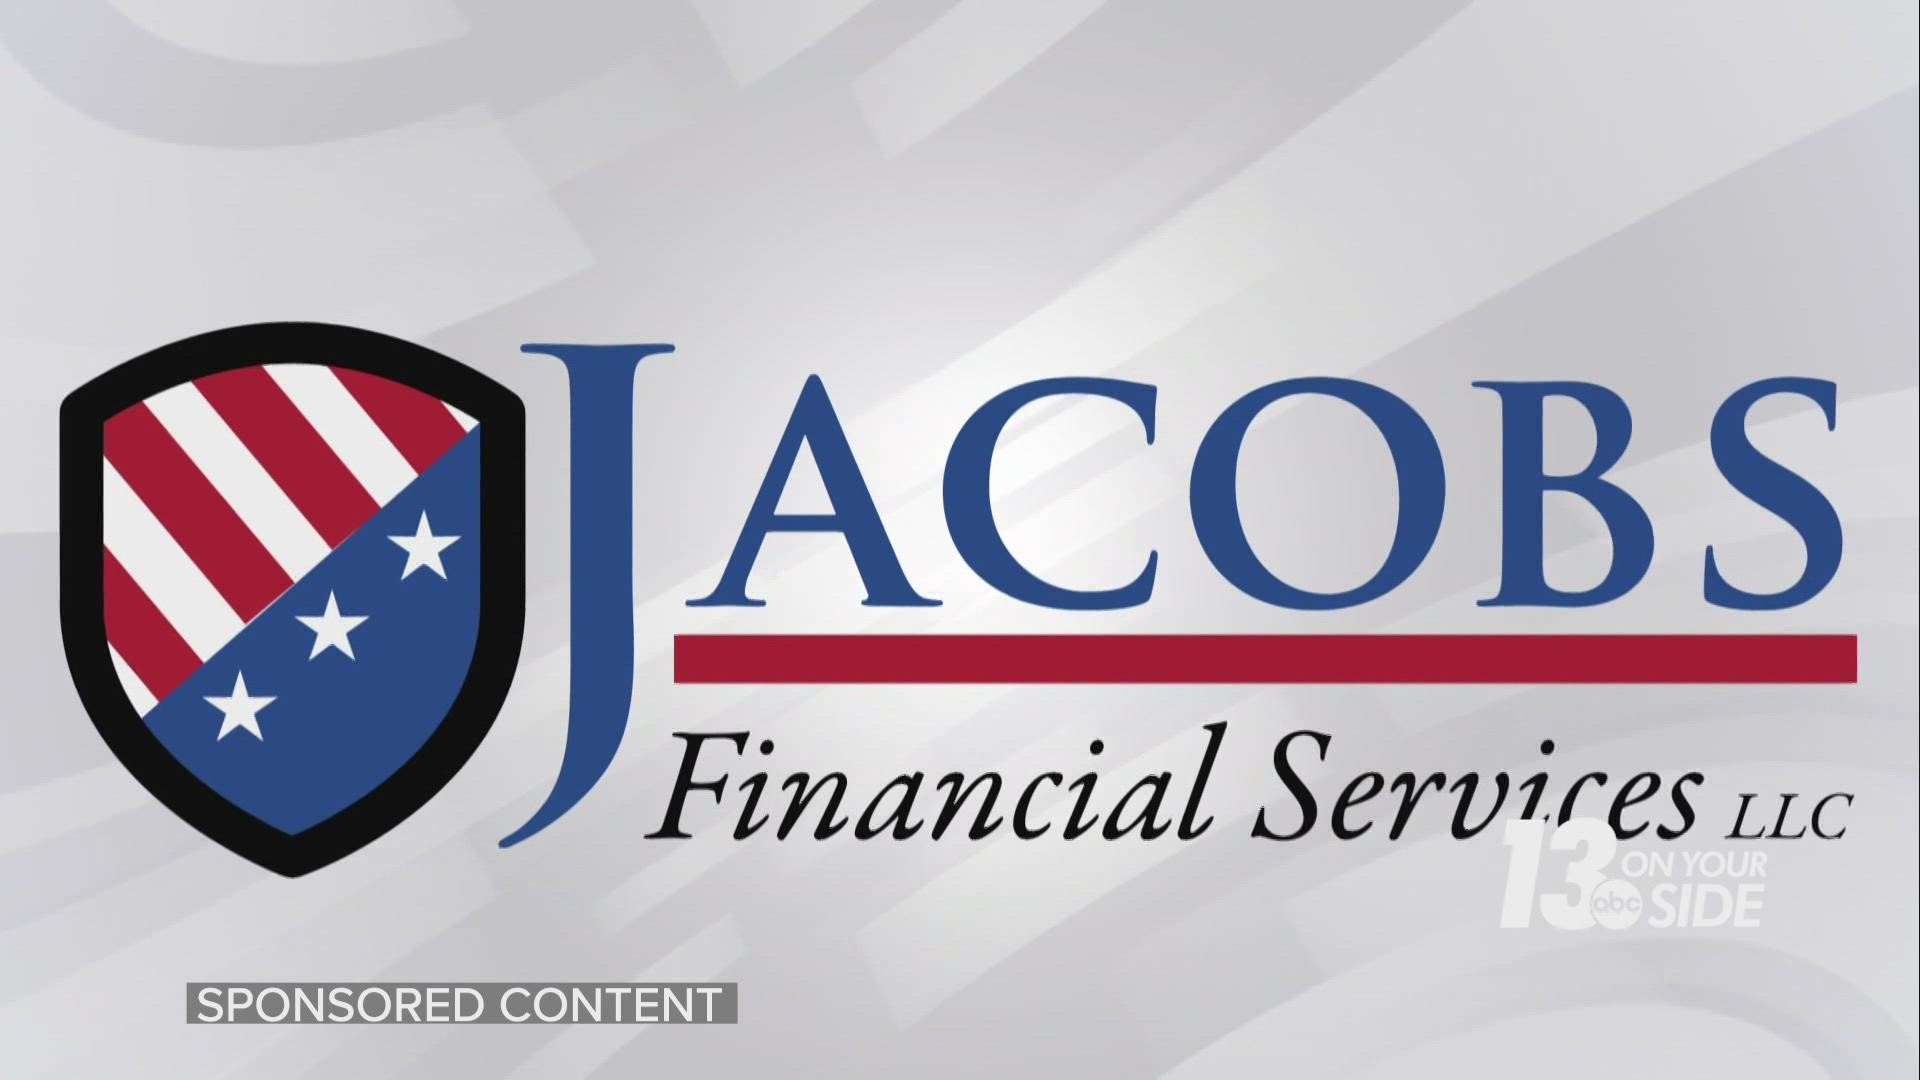 Jacobs Financial Services knows how to help you plan for your retirement.